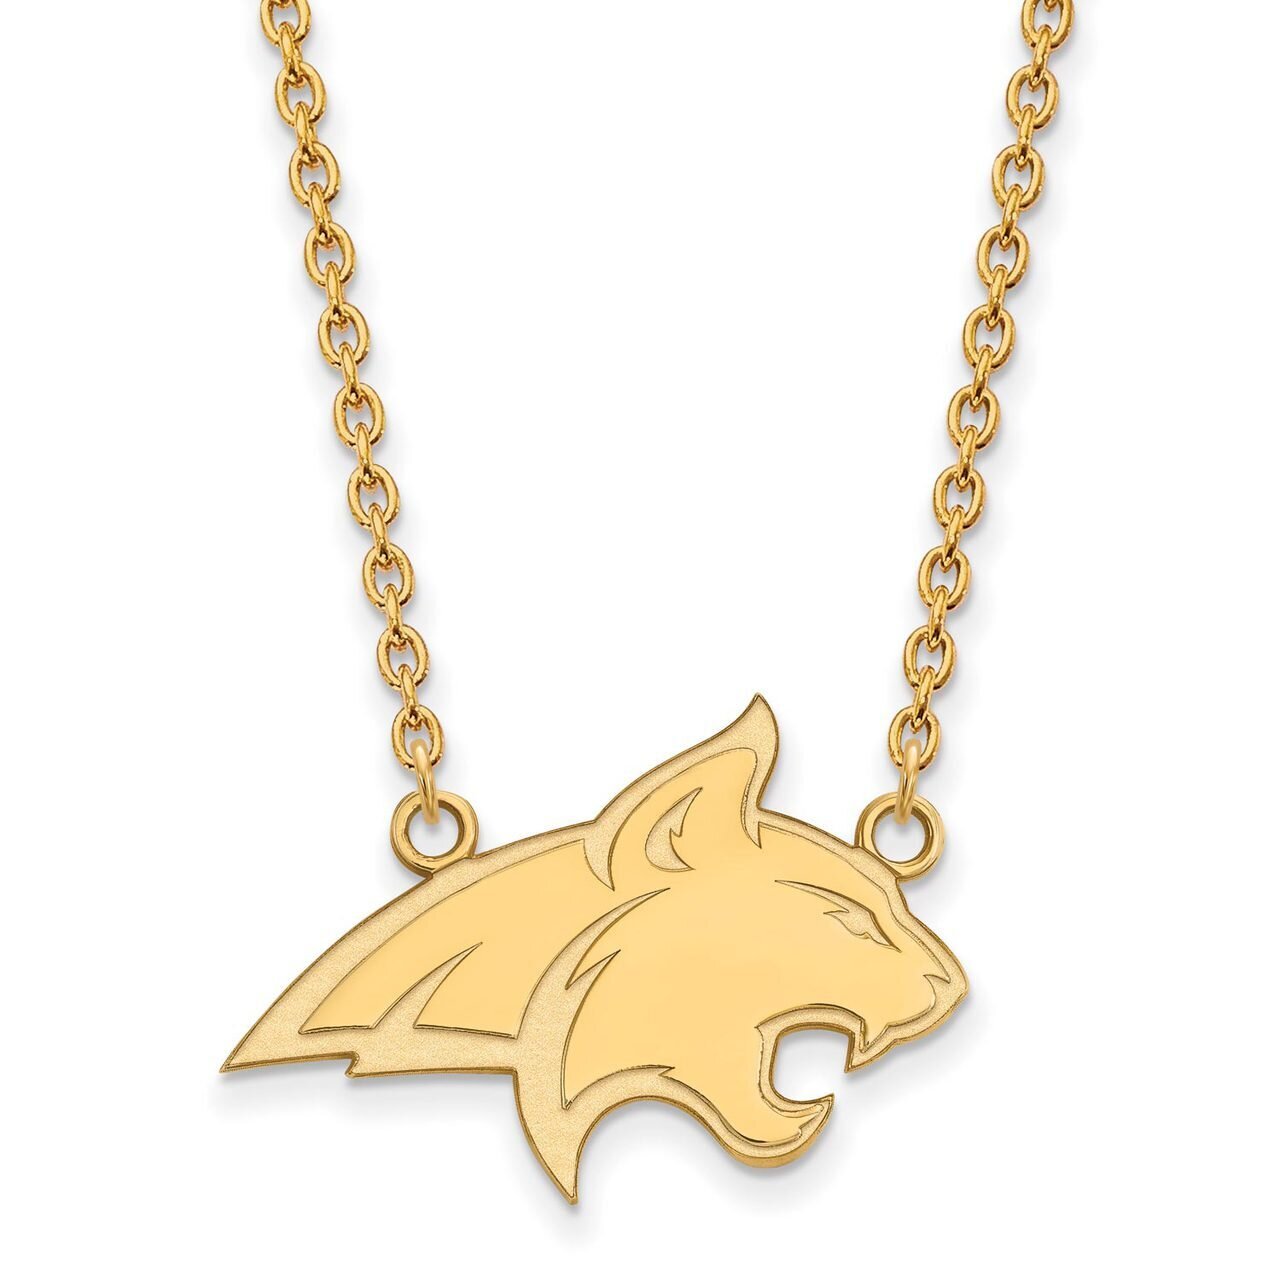 Montana State University Large Pendant with Chain Necklace 14k Yellow Gold 4Y010MTU-18